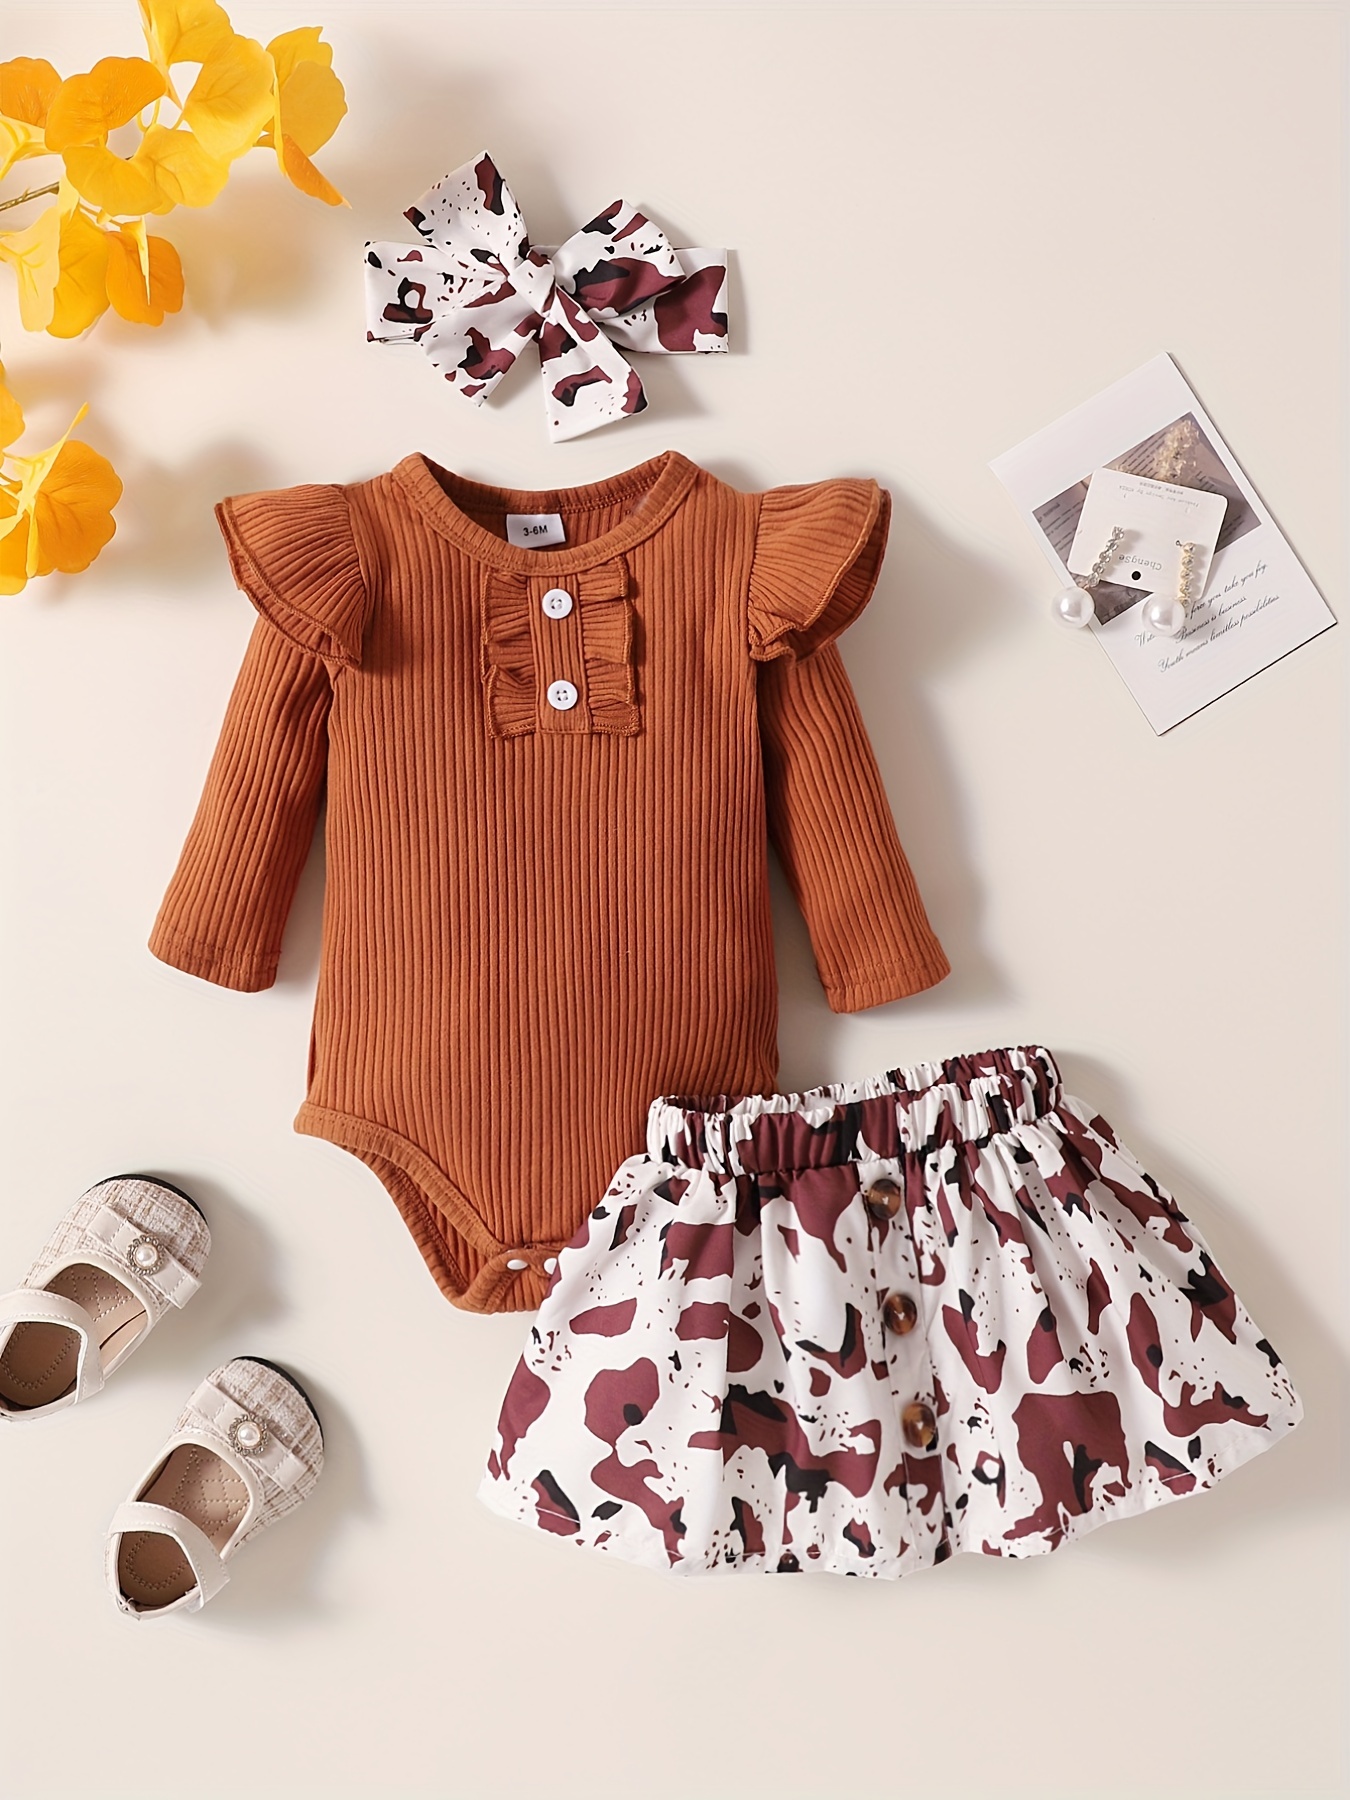 Baby Girl Clothes Outfits , Ruffle Romper Pants